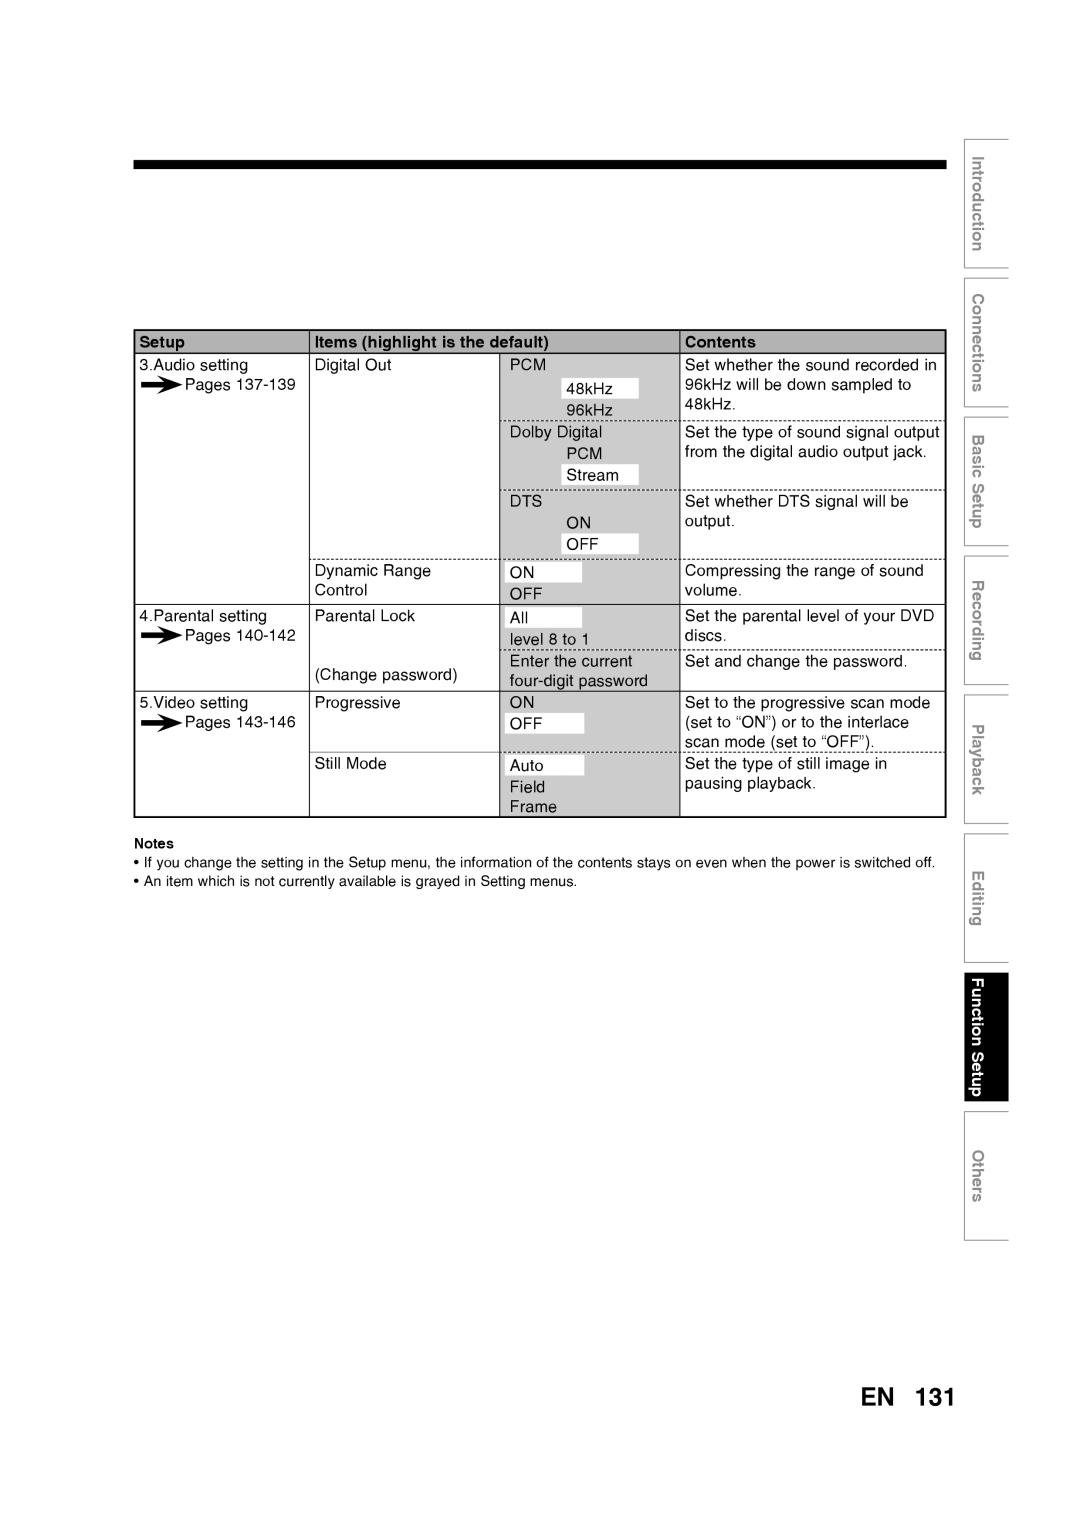 Toshiba D-RW2SU/D-RW2SC manual Items highlight is the default, Contents, Editing Function Setup Others 